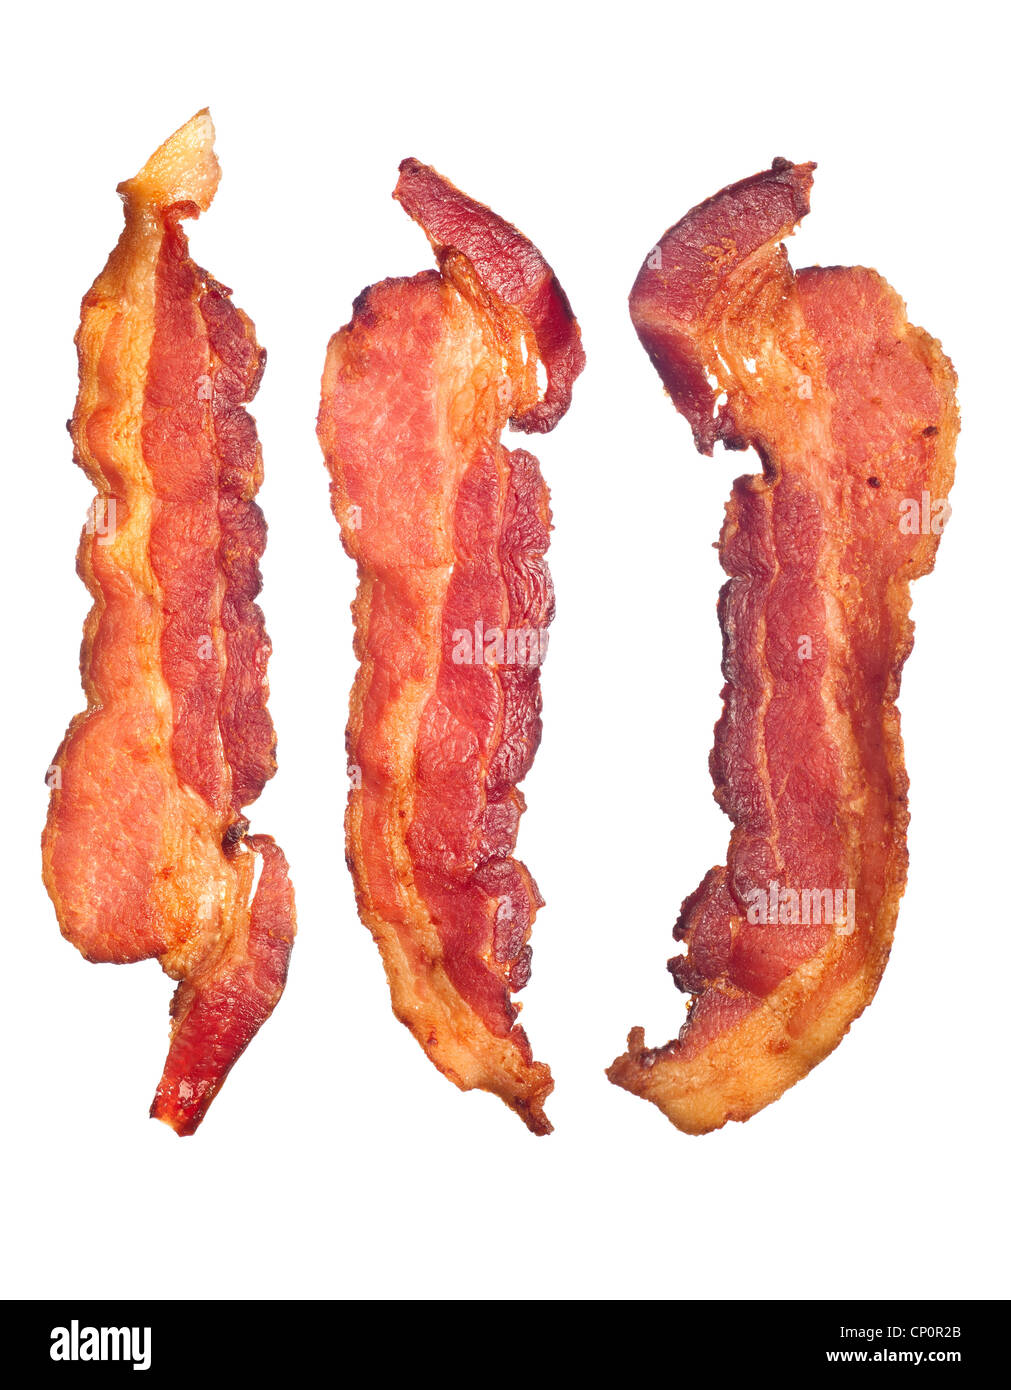 Three cooked, crispy fried bacon isolated on a white background. Good for many health and cooking inferences. Stock Photo